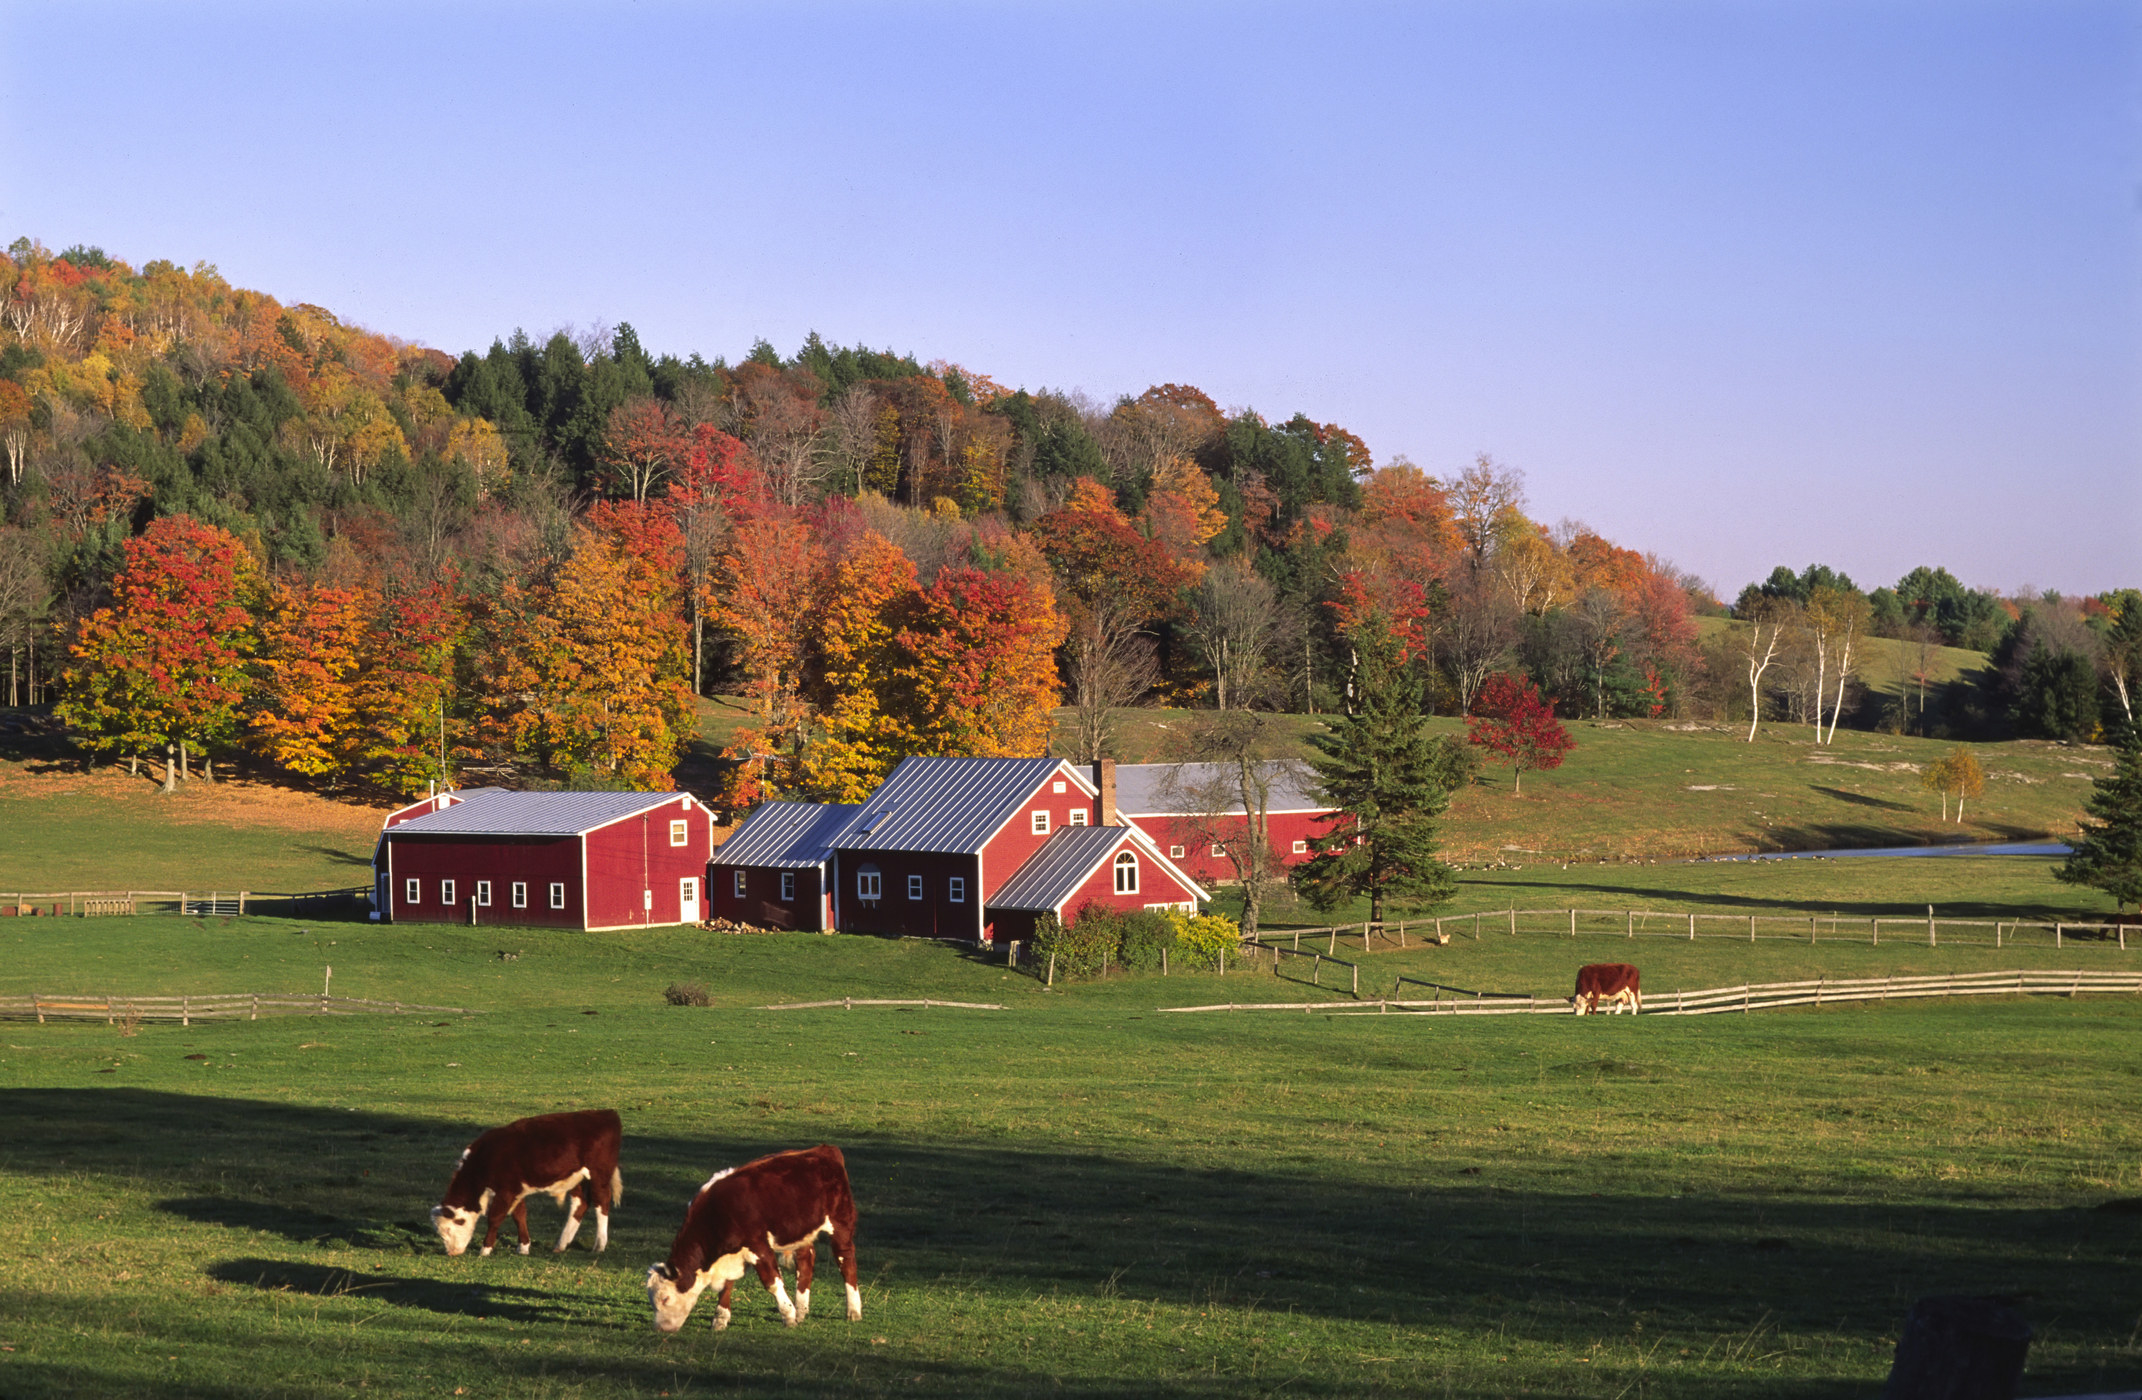 A red barn sits on green grass with autumnal trees in the background and two cows grazing in the foreground